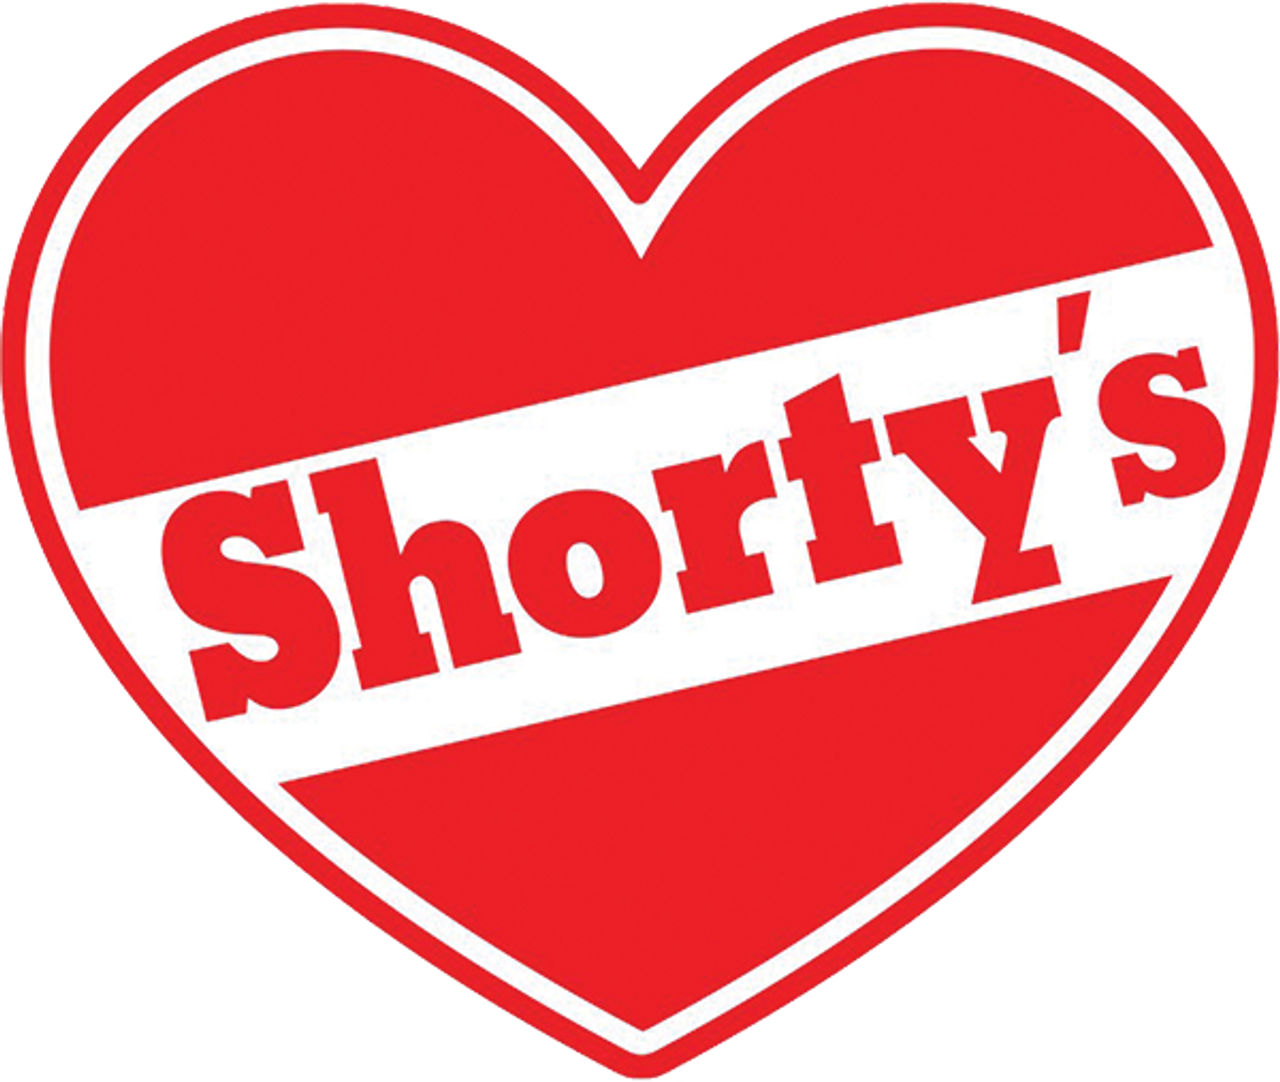 SHORTYS HEART 2.5" DECAL (2 PACK)